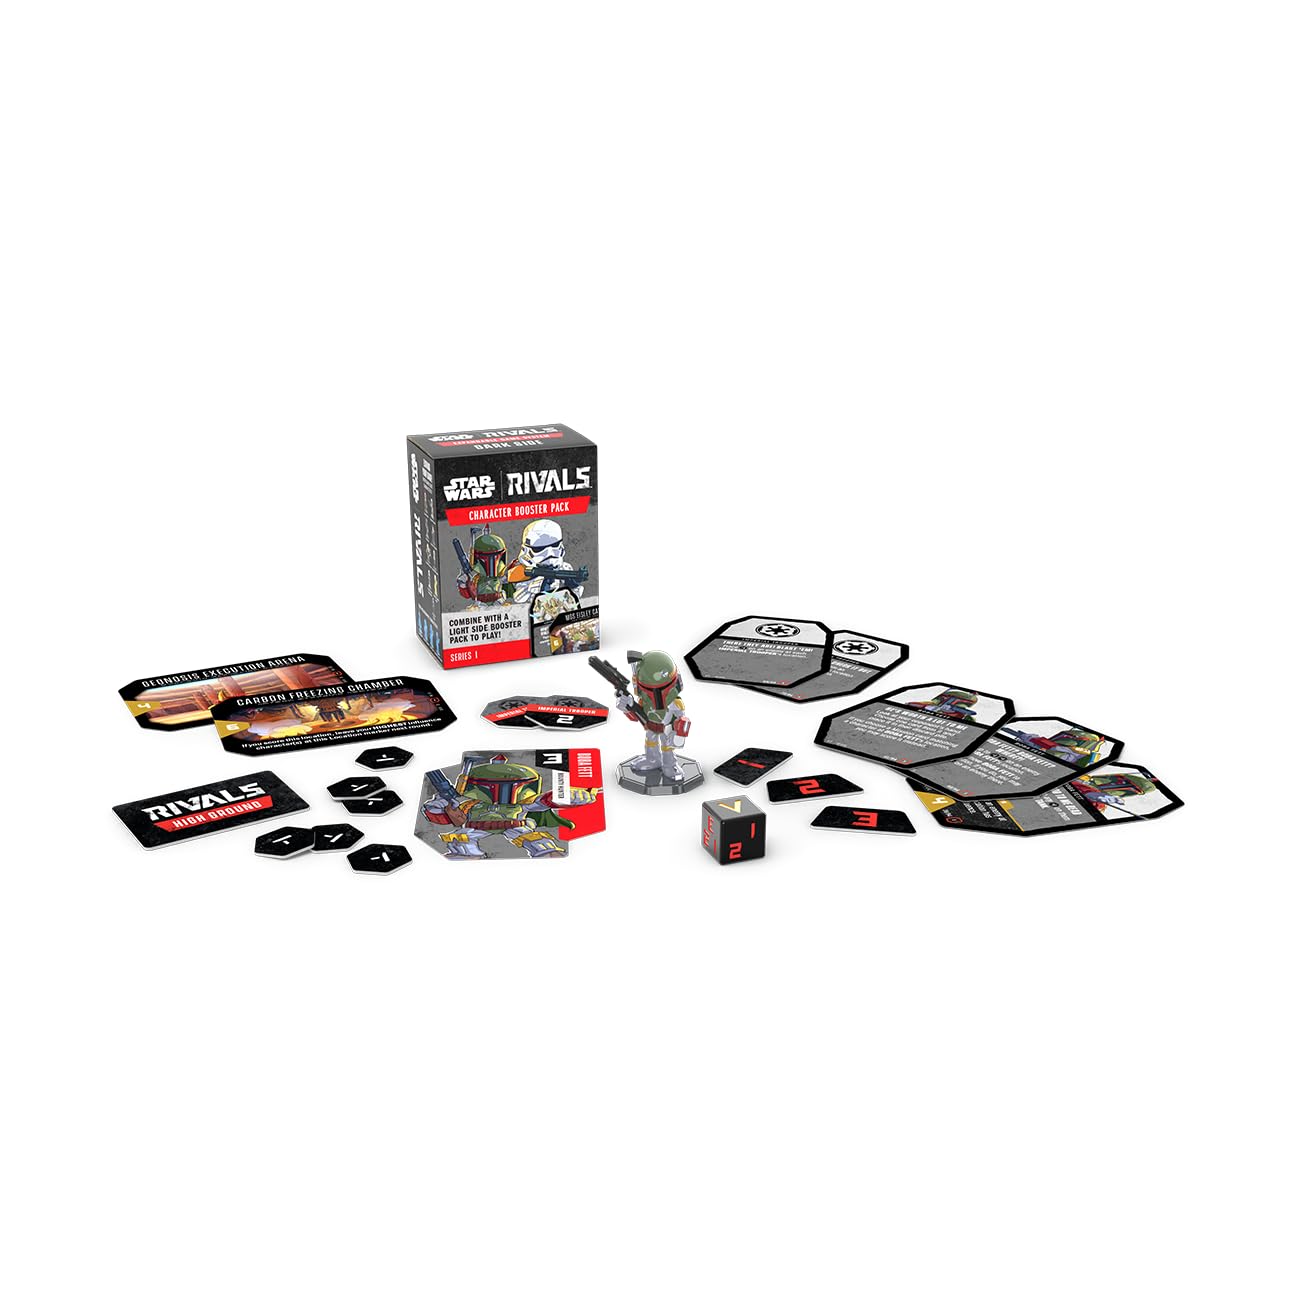 Funko Star Wars Rivals Expandable Game System for 2 Players Ages 7 and Up - Dark Side Character Pack - Series 1